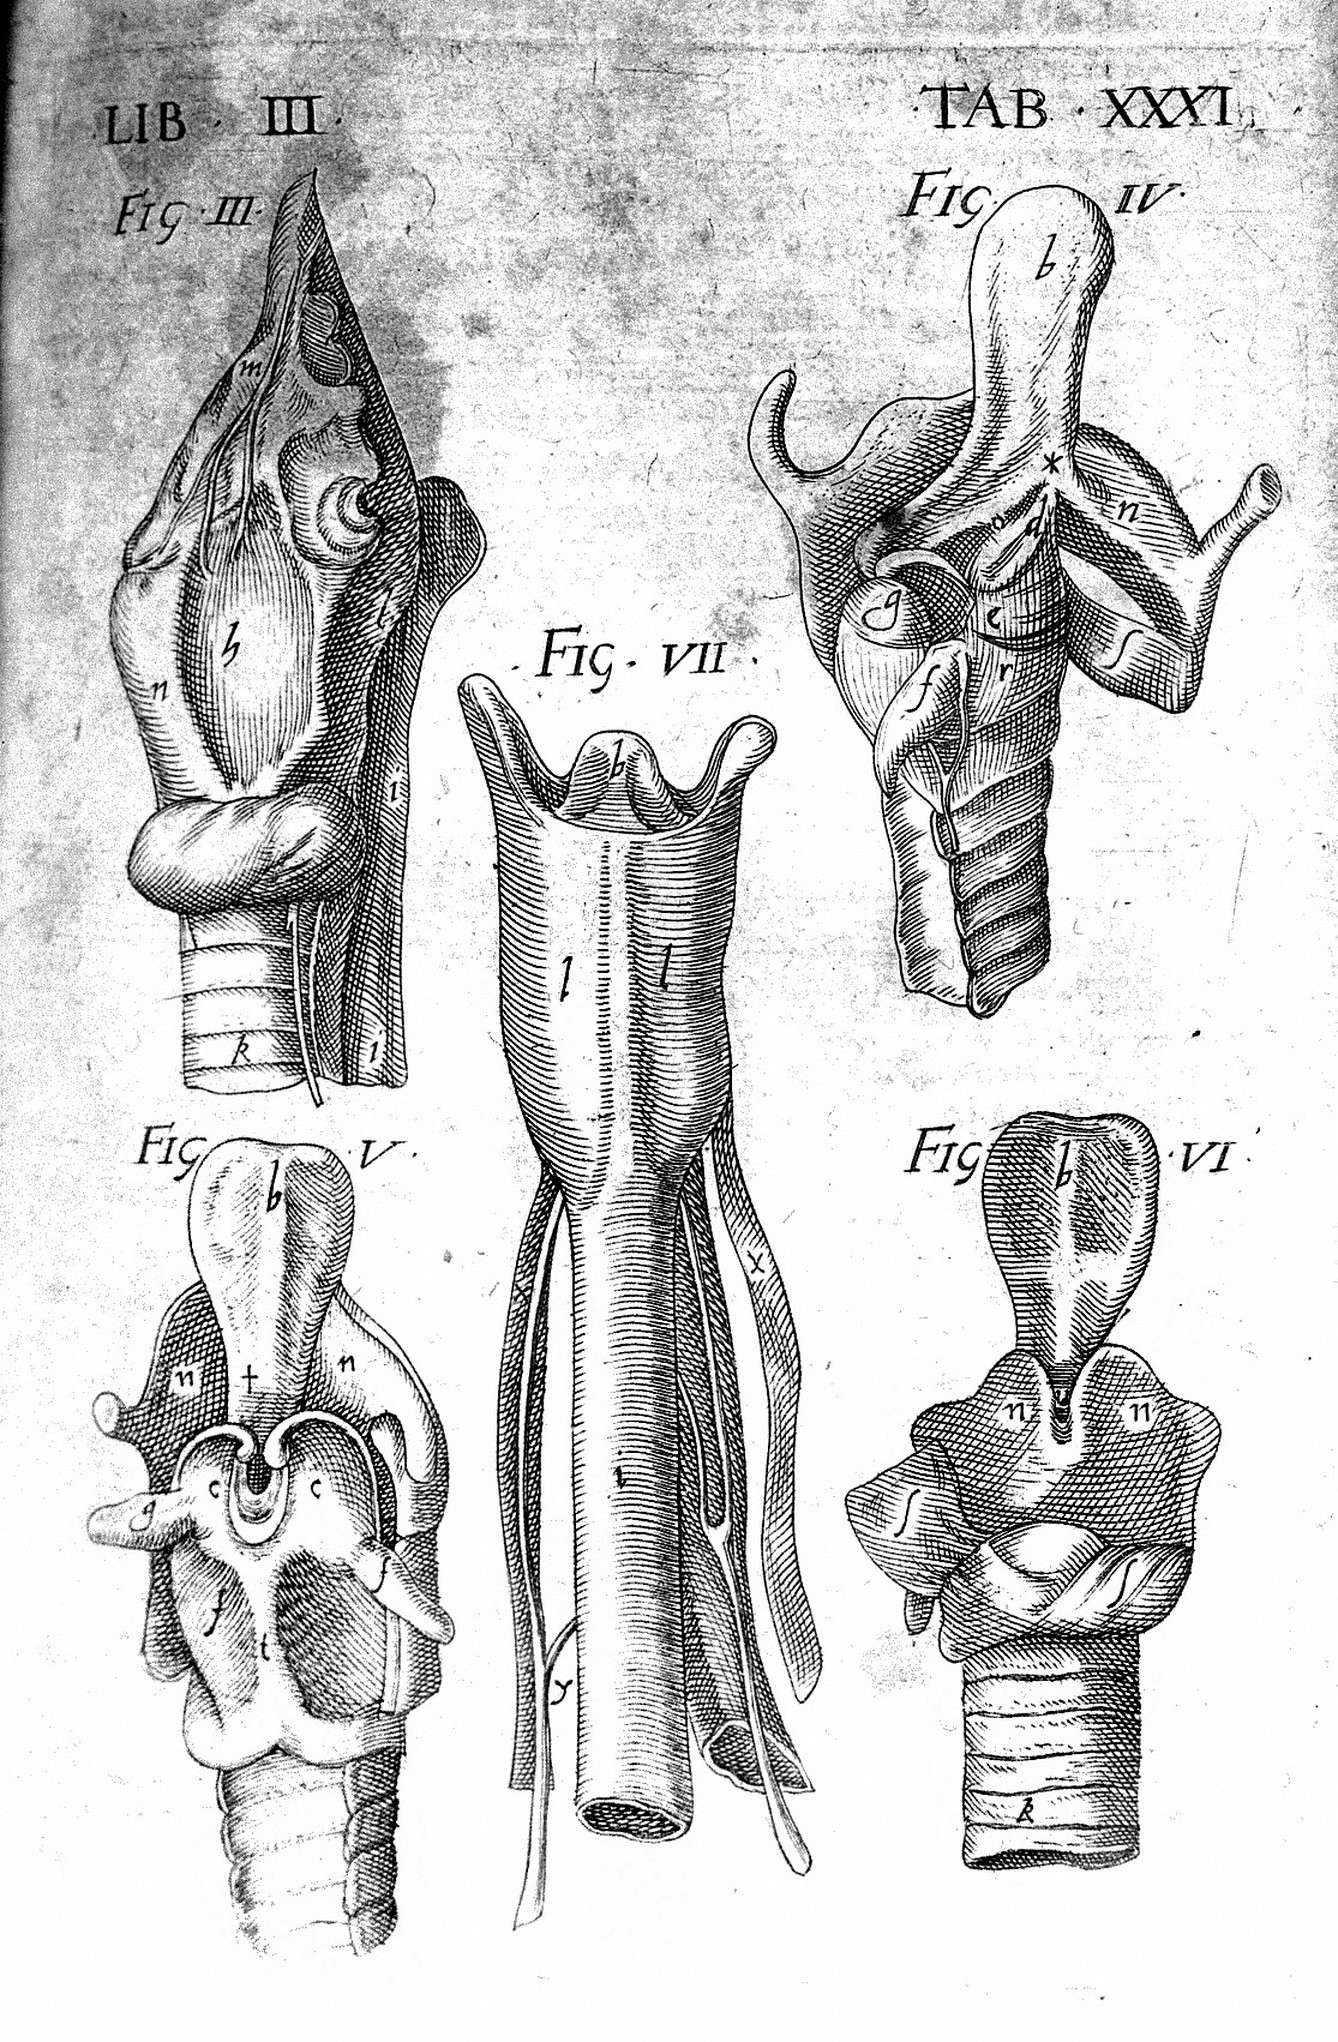 Black and white manuscript image featuring five diagrams of the larynx